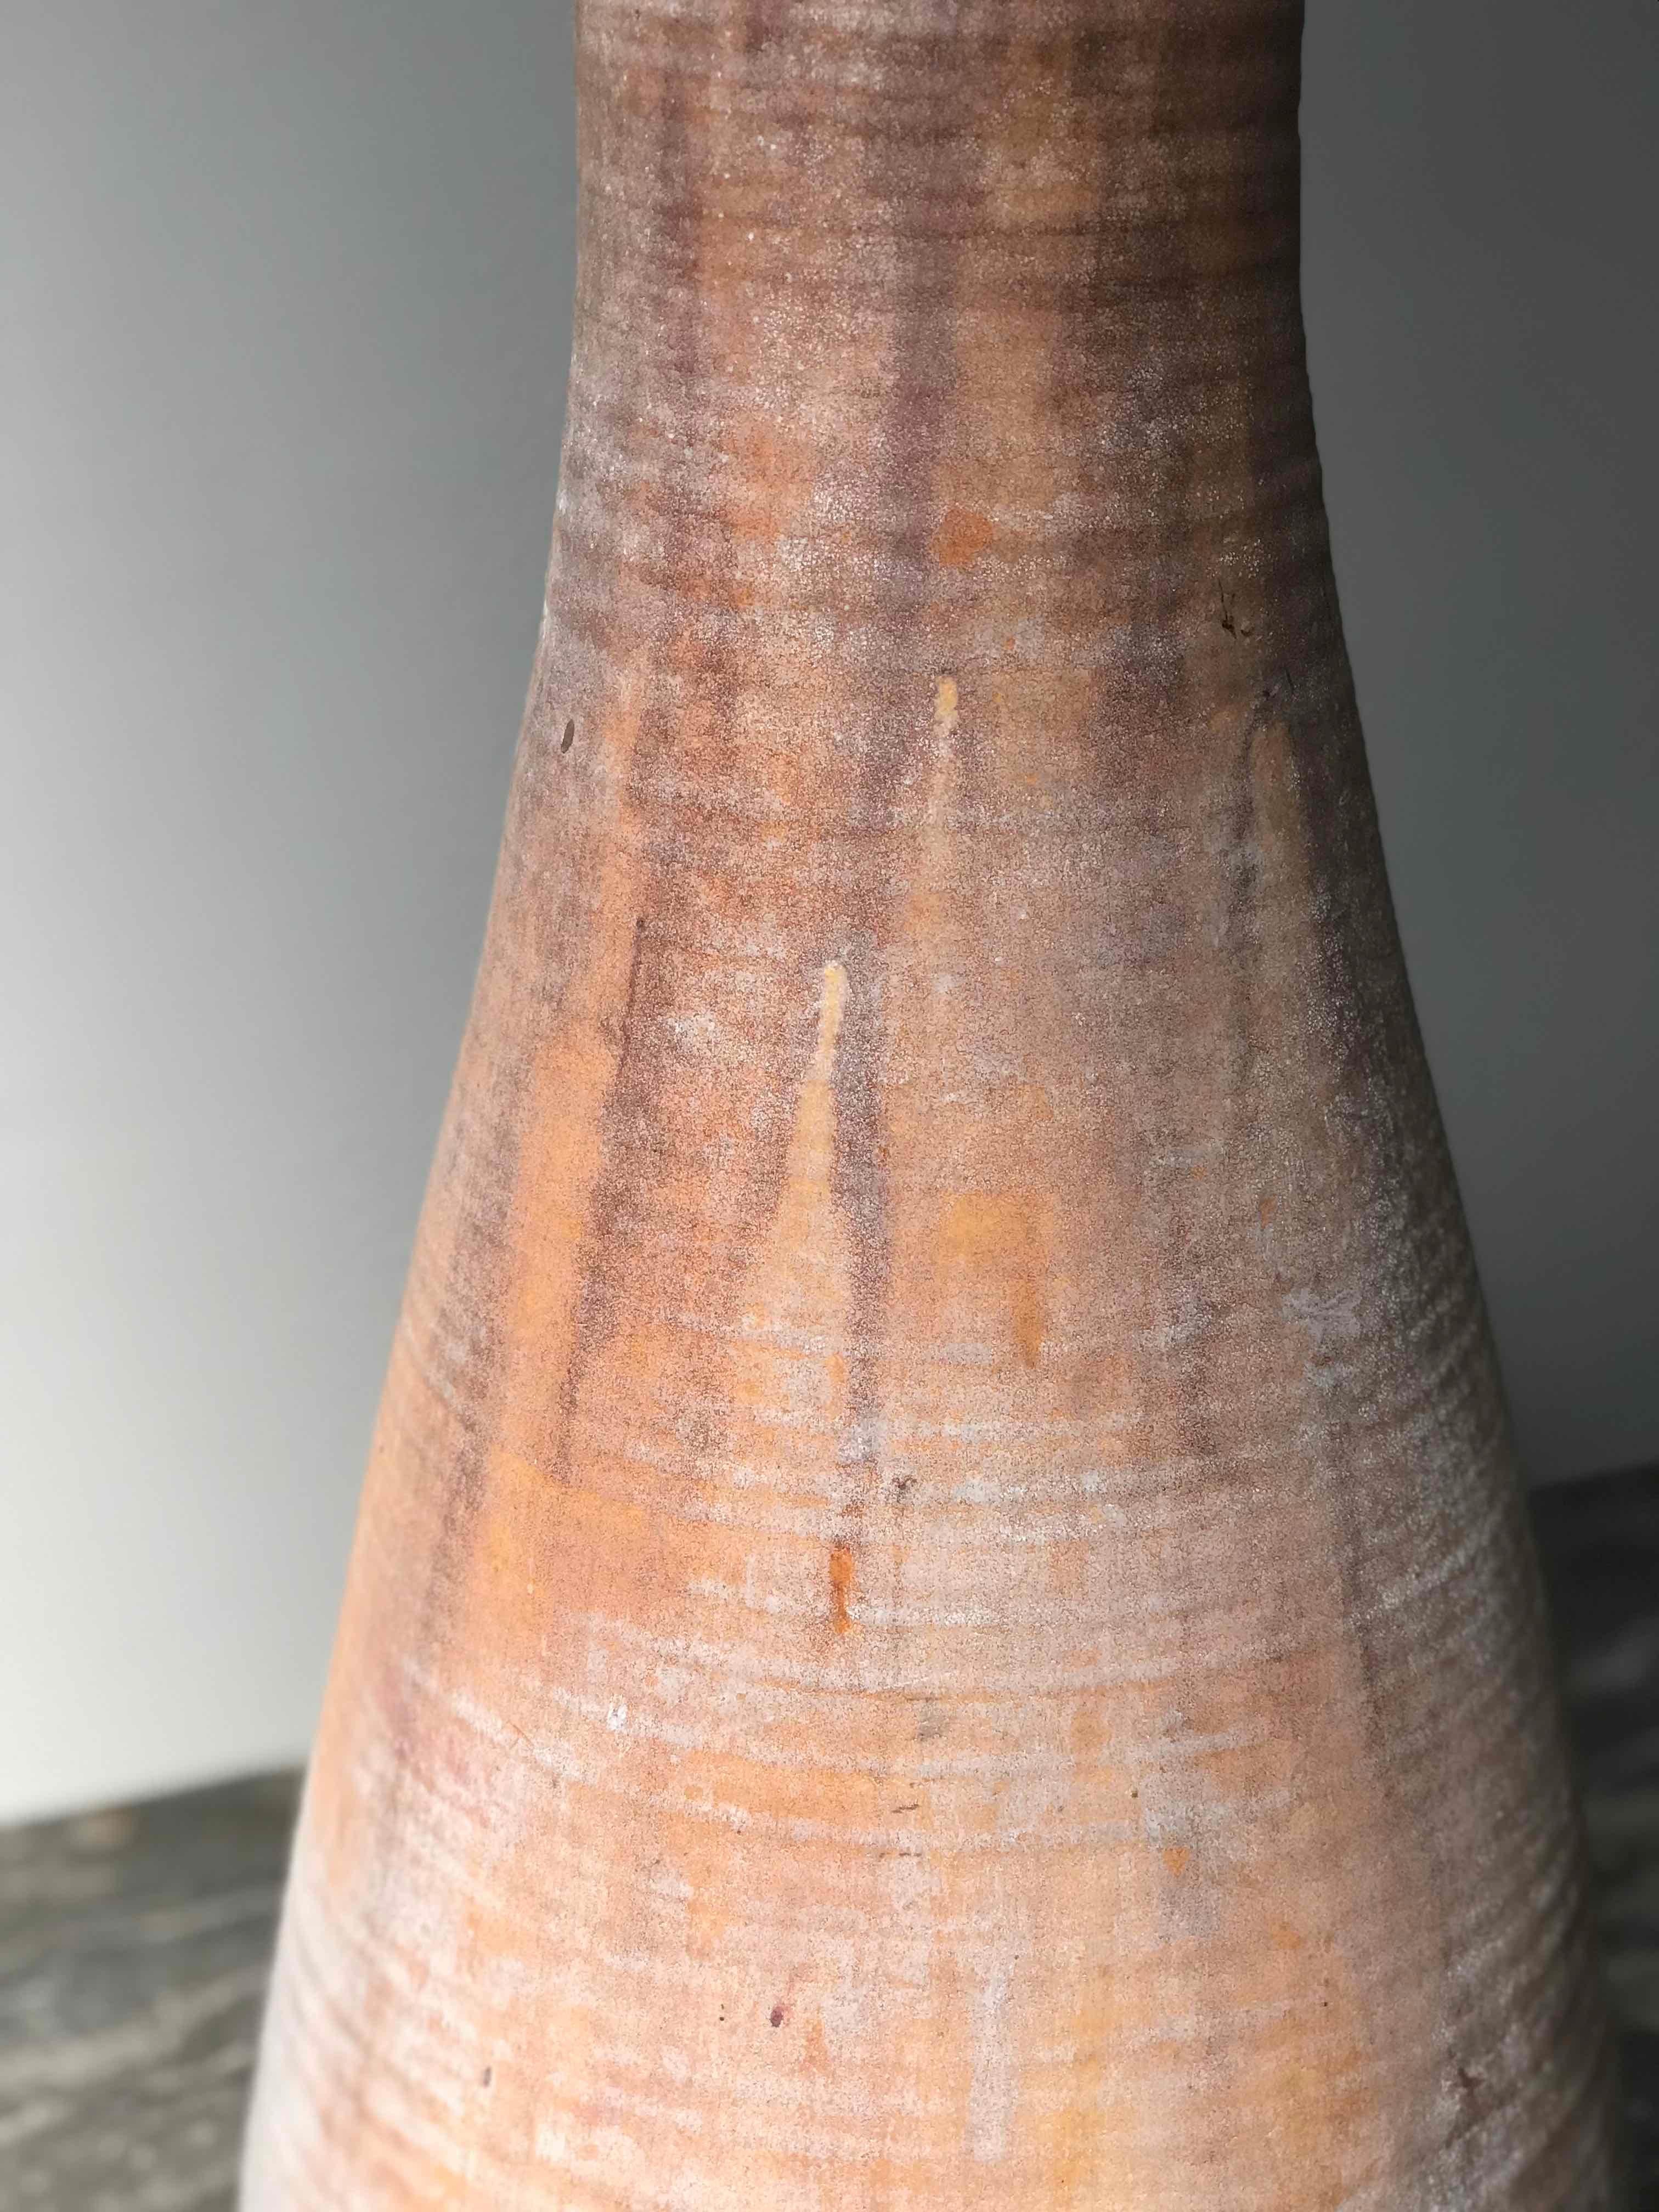 Art Deco 1930s Pottery Vase with Natural Orange Exterior and Glazed Interior from France